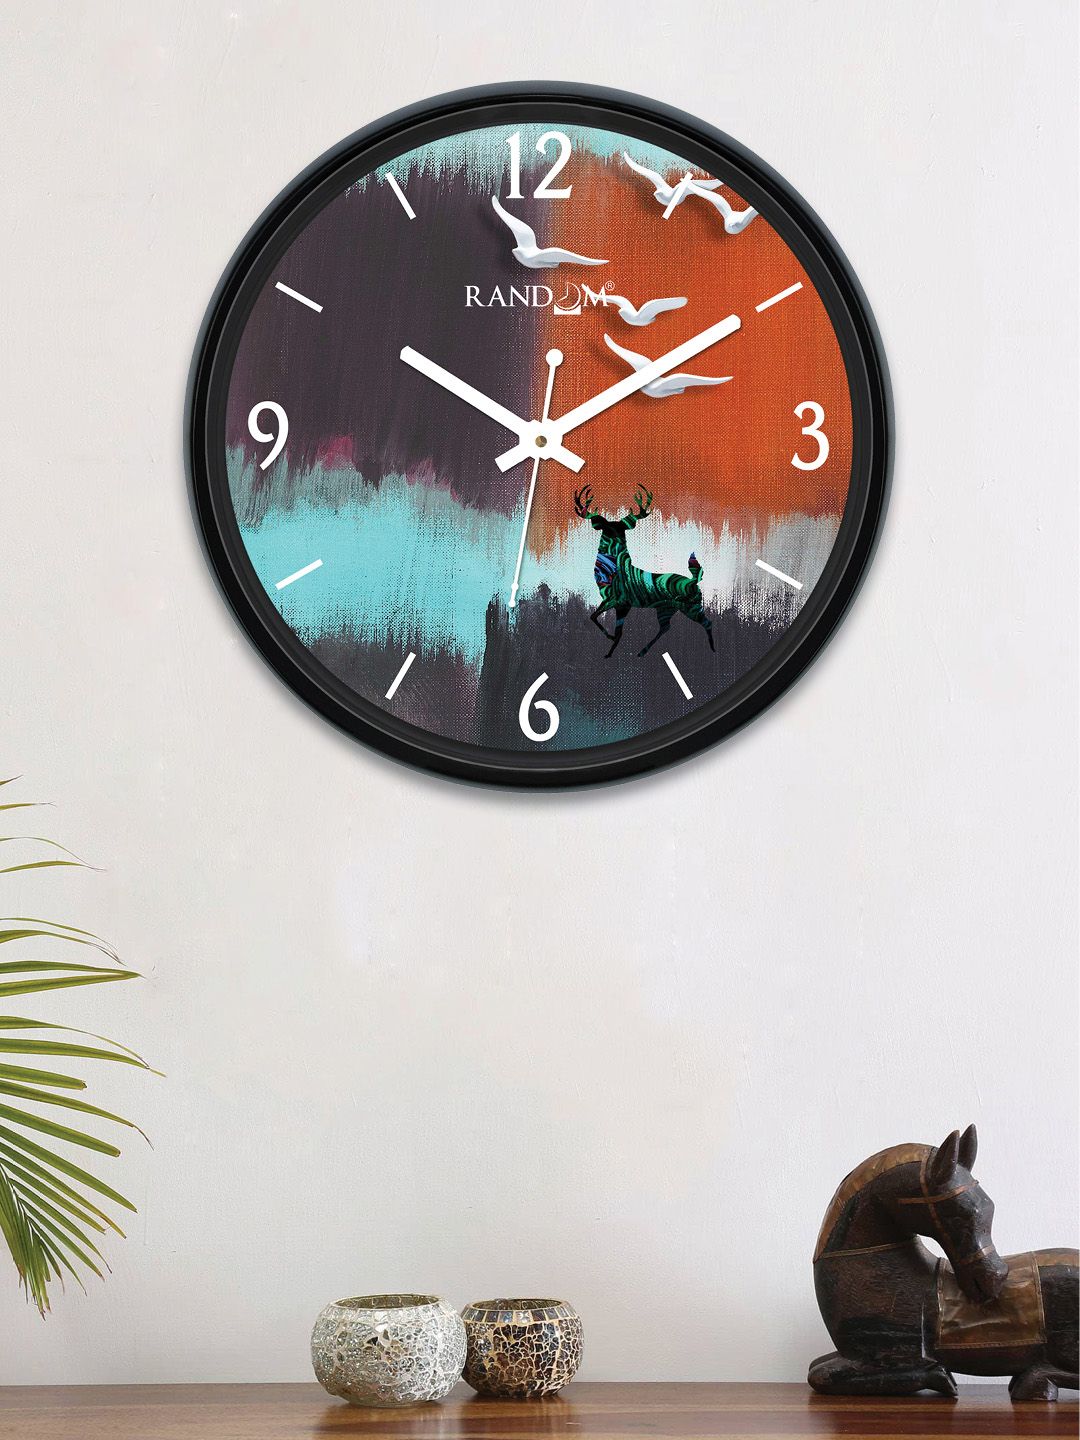 RANDOM Multicoloured Round Printed 30 cm Analogue Wall Clock Price in India